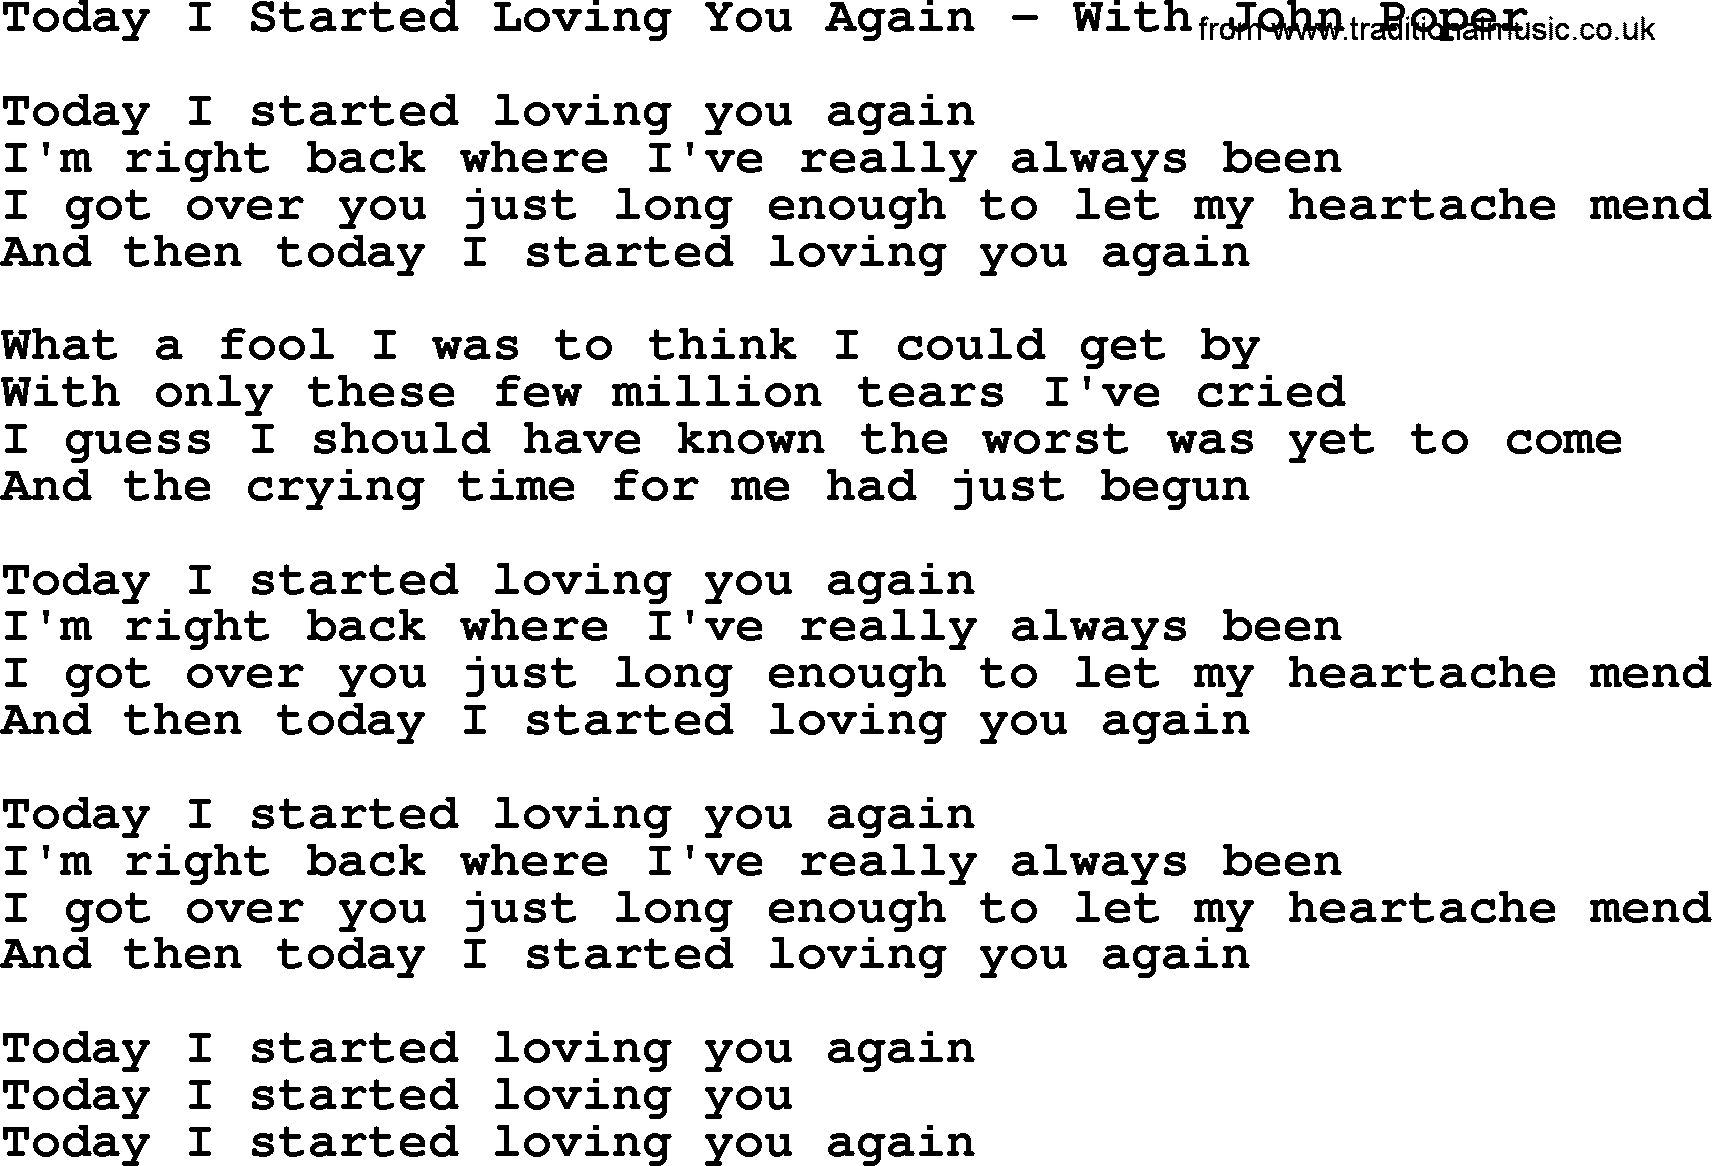 Dolly Parton song Today I Started Loving You Again - With John Poper.txt lyrics